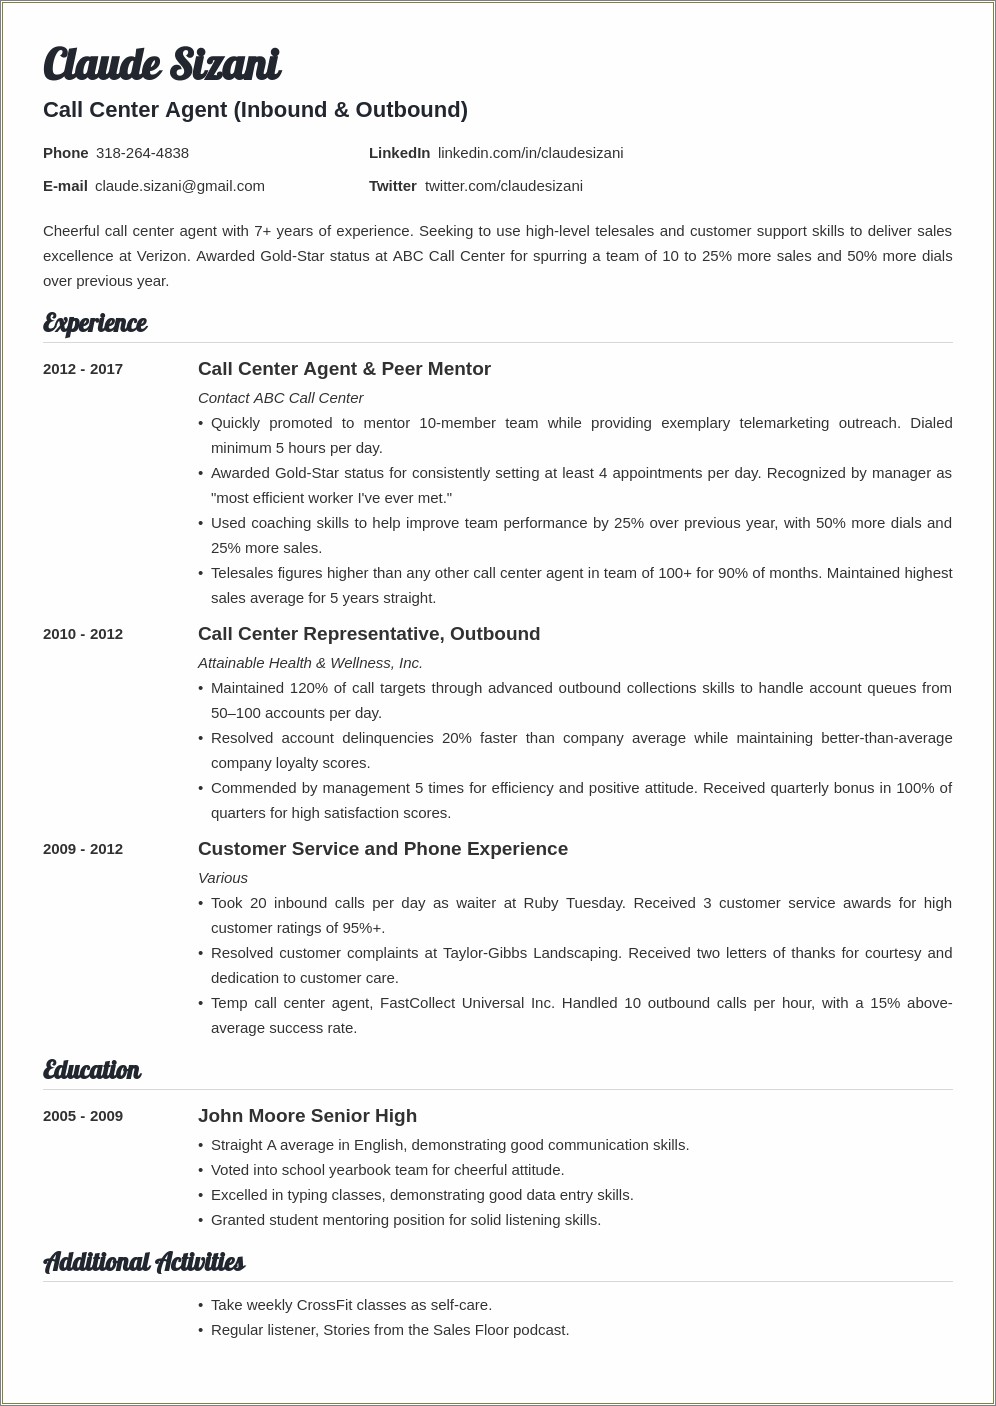 Resume Objective Samples For Call Center